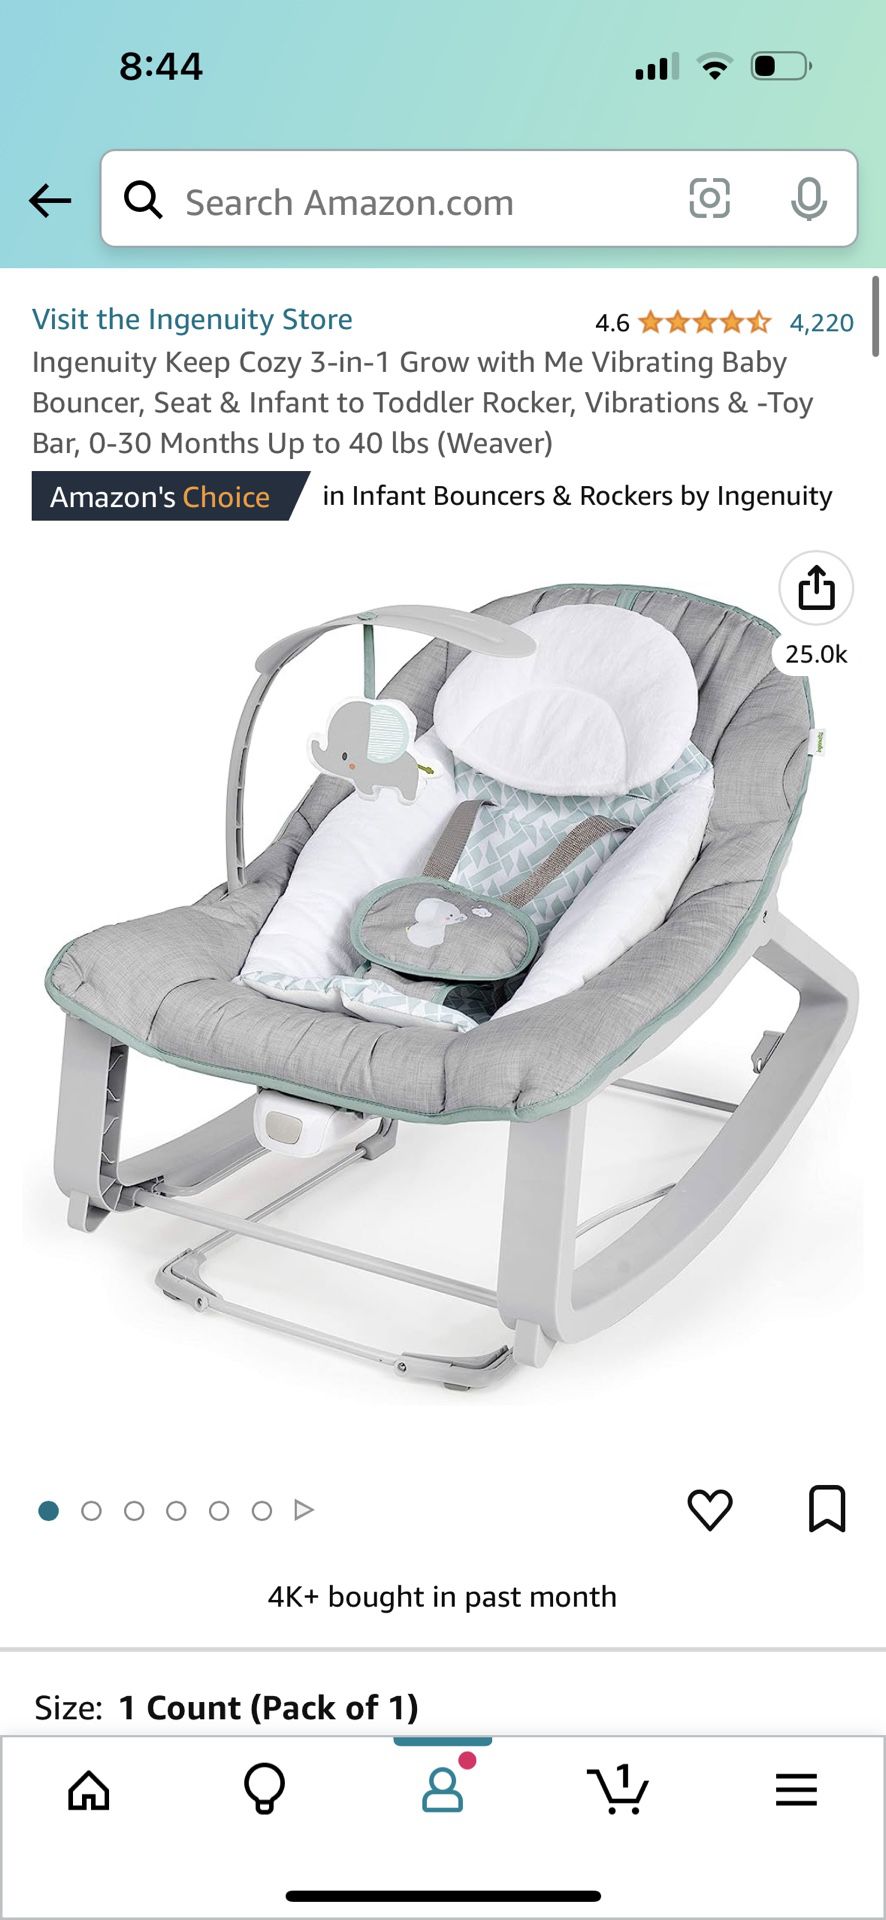 3 in 1 vibrating baby bouncer, seat, and rocker